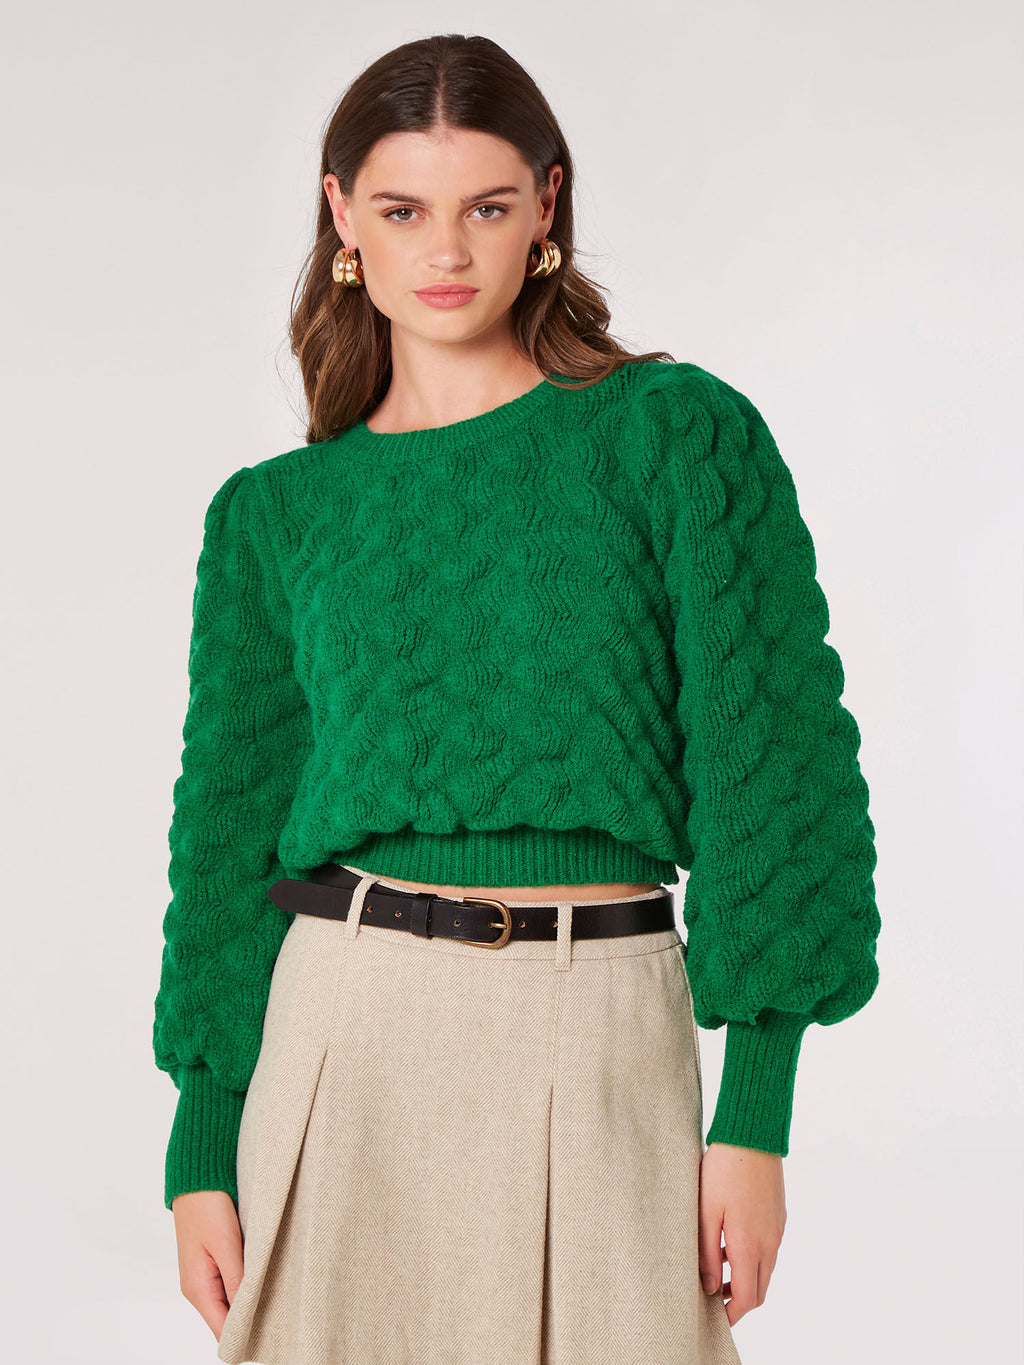 The Mint Julep Boutique Get Creative Cable Knit Sweater Dress